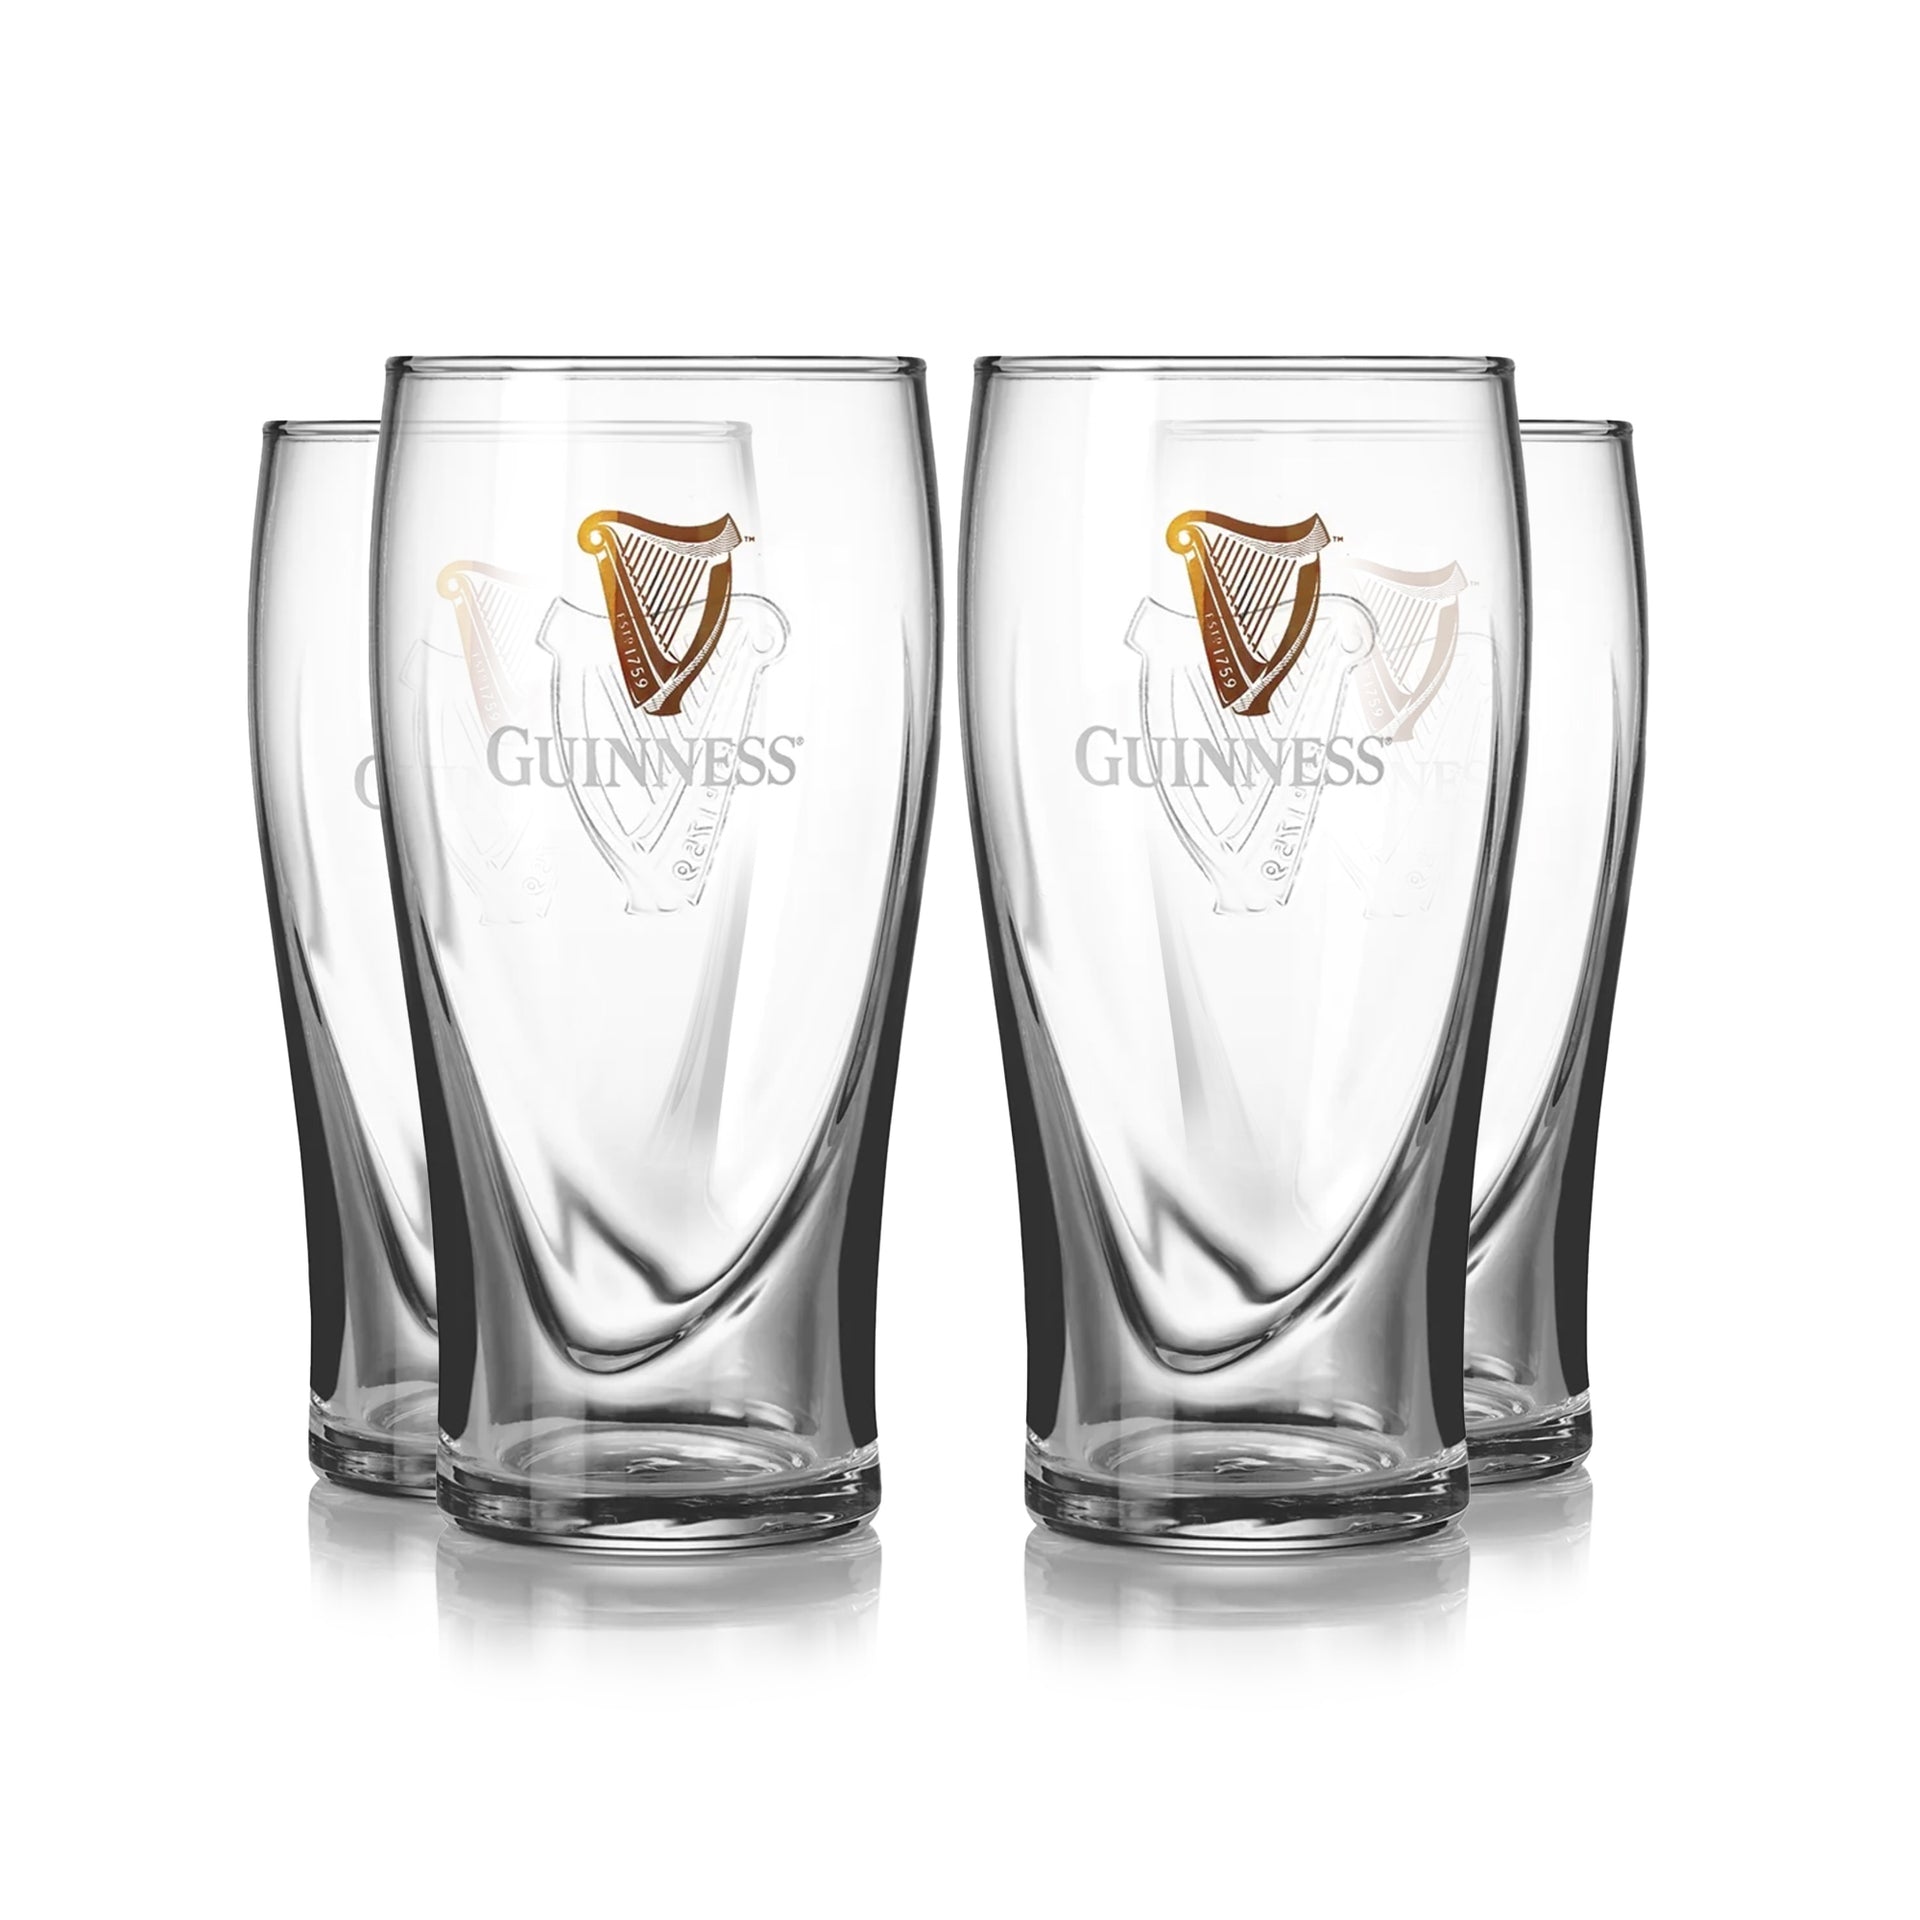 Guinness Pub Glasses, Set of 4: Mixed Drinkware Sets